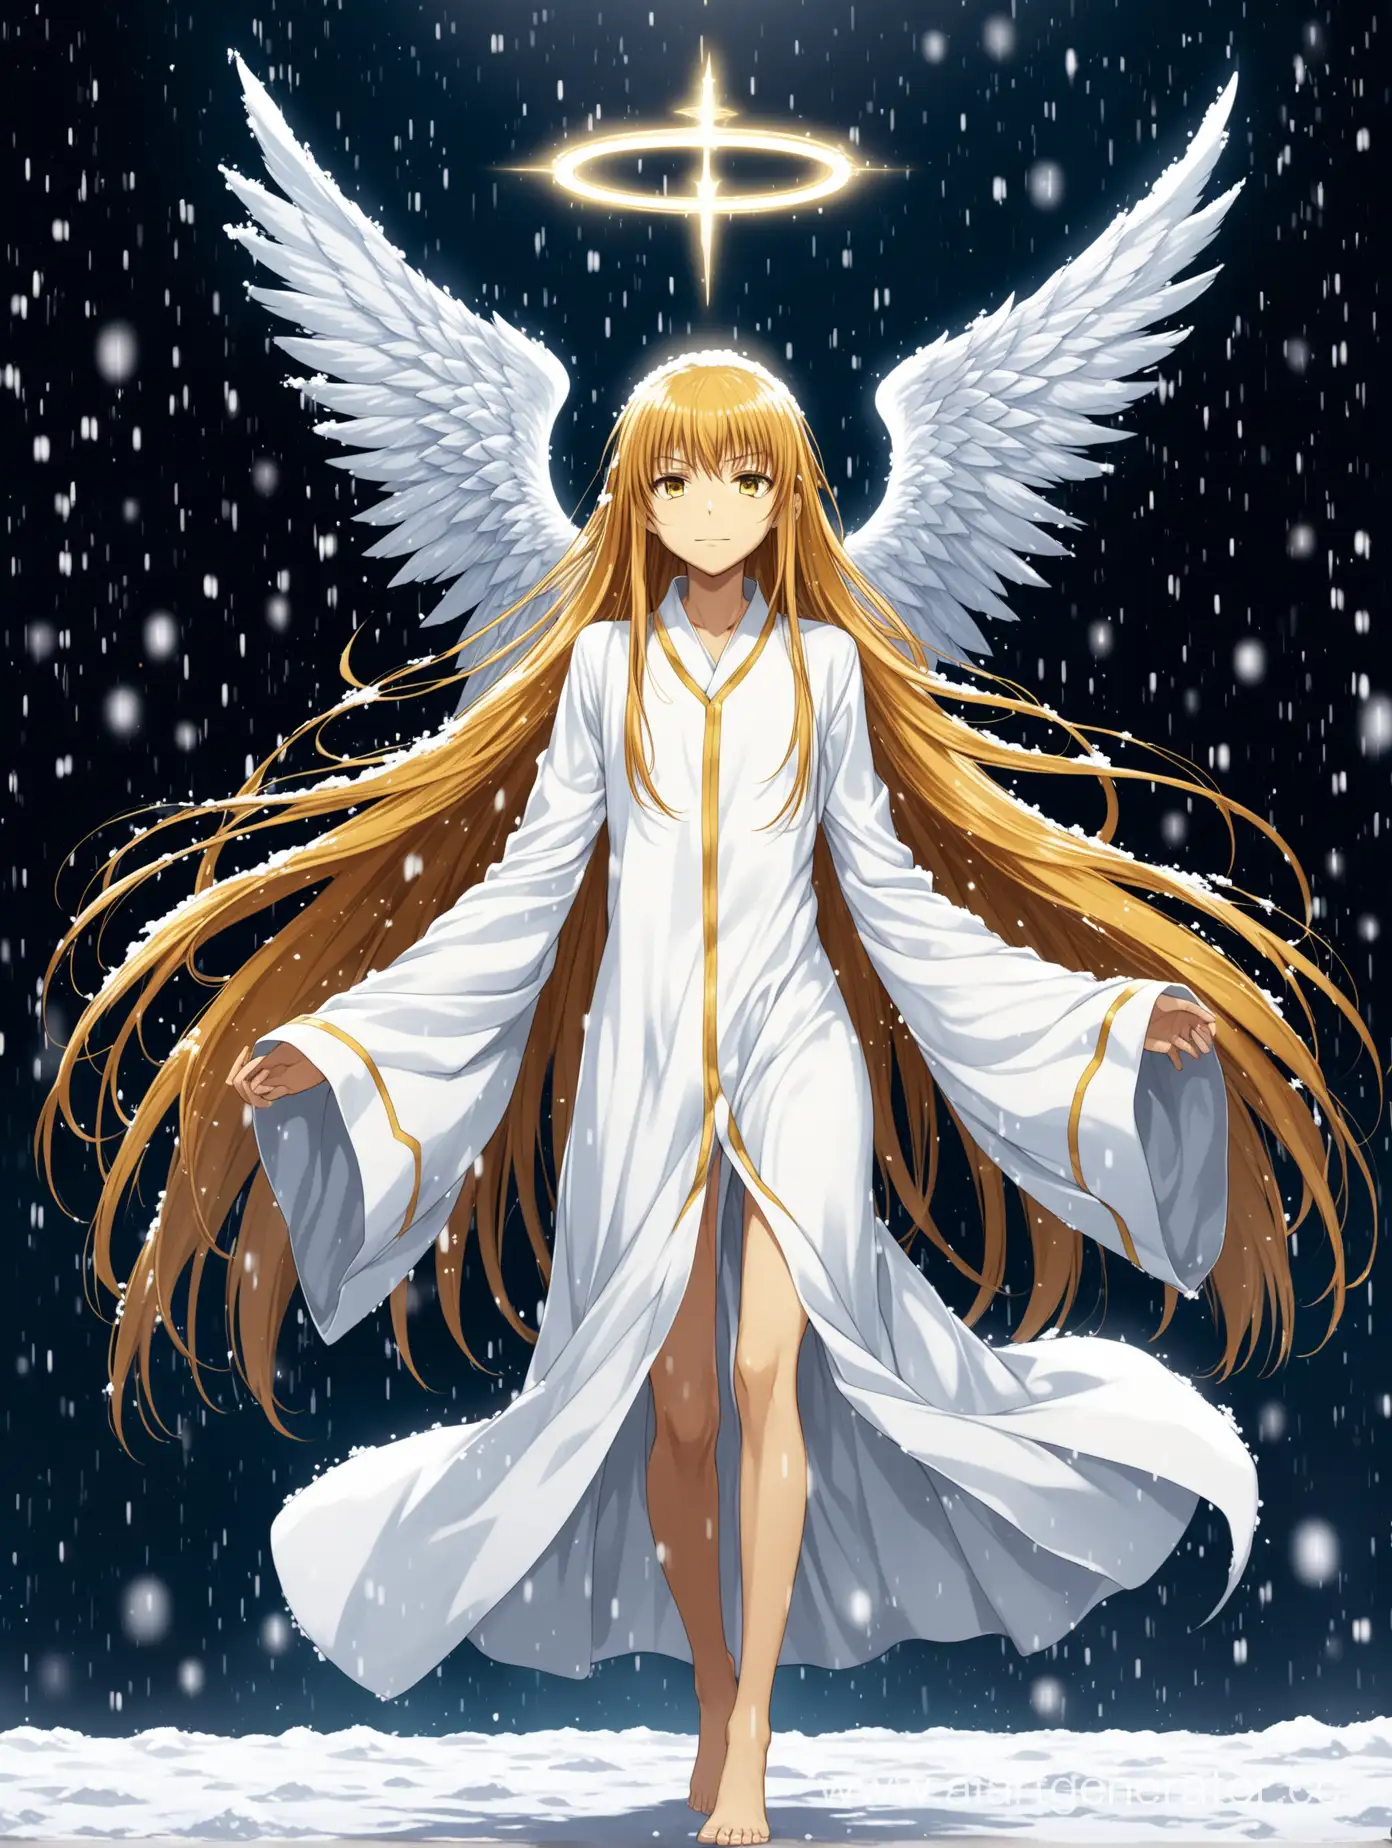 Toaru Majutsu no Index Aiwass boy with golden long hair with long straight bangs, golden eyes, long closed white robe, long wide sleeves, bare feet, night atmosphere, snow, falling snow, headlights, insidious seductive sly smile, shining angel halo, angel wings